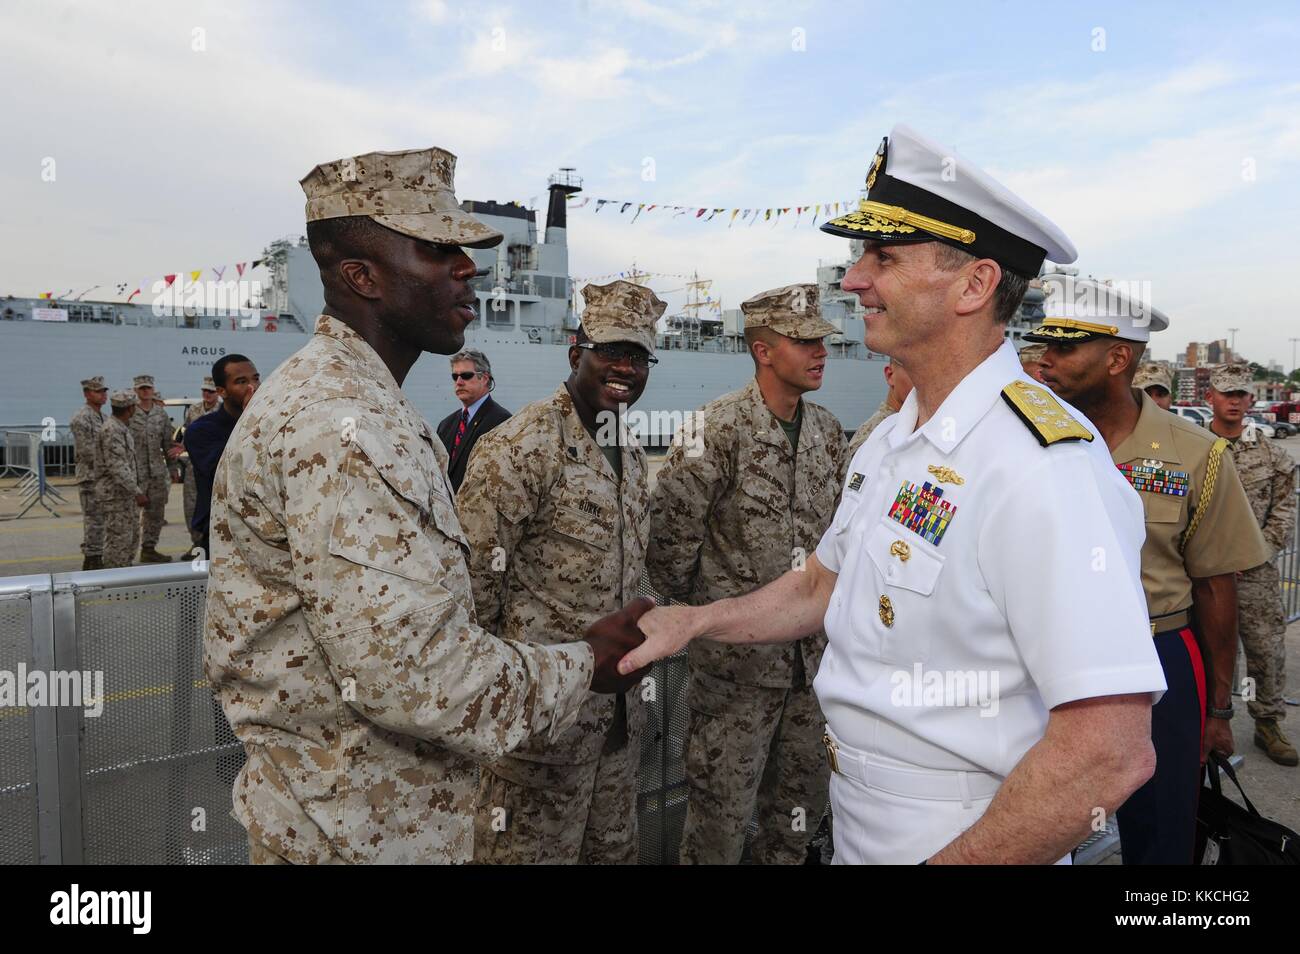 Chief of Naval Operations CNO Admiral Jonathan Greenert shakes hands and meets with Marines at the USO New York City Fleet Week block party, New York. Image courtesy Mass Communication Specialist 1st Class Peter D. Lawlor/US Navy. 2012. Stock Photo